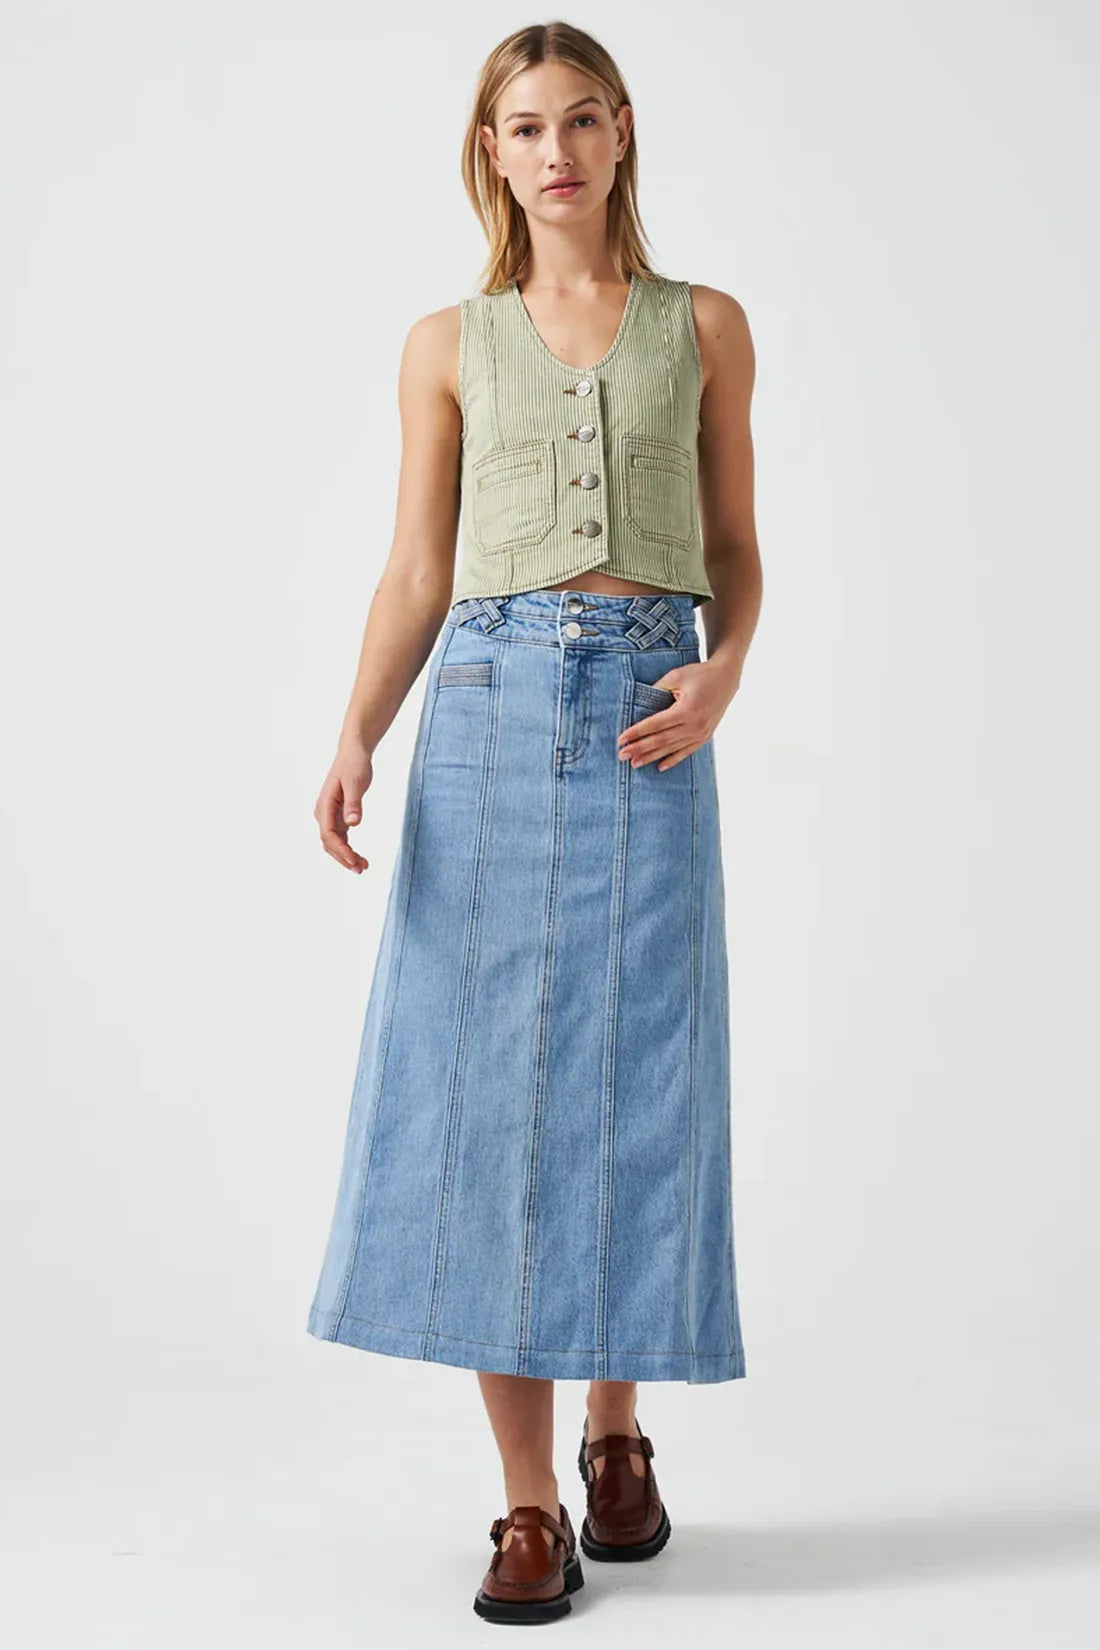 Willow Skirt - Rodeo Vintage